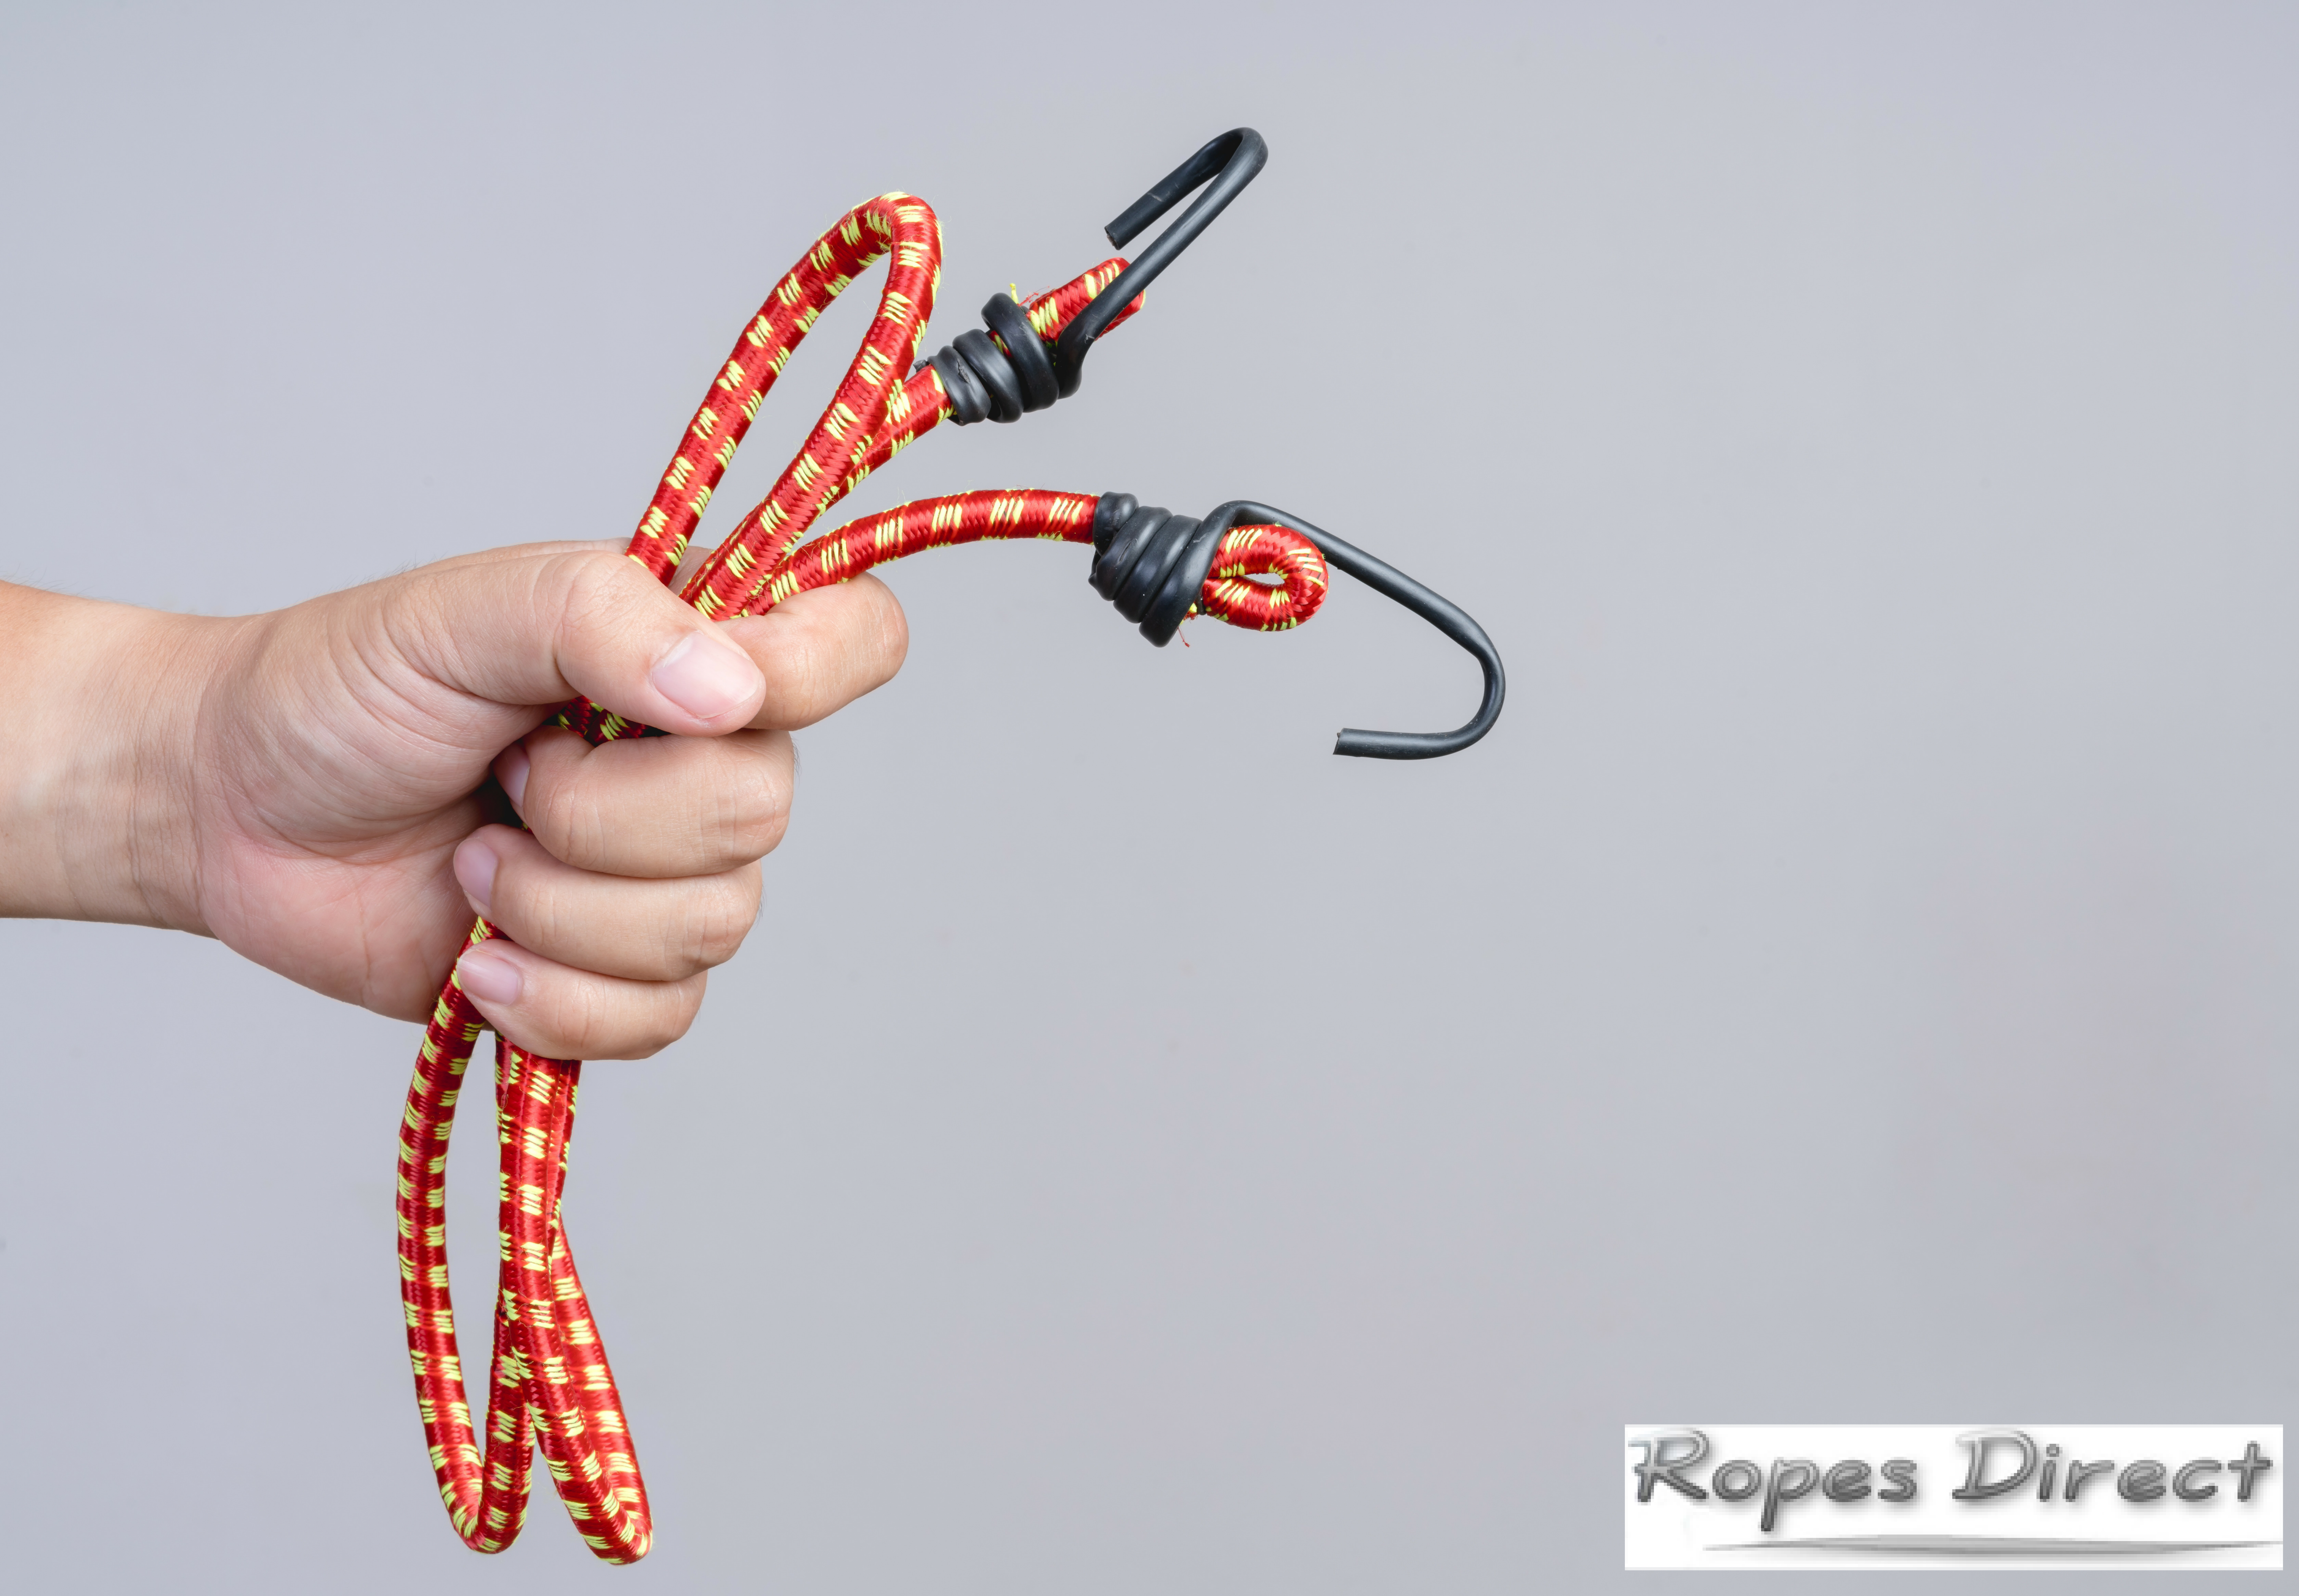 Person holding bungee cord with J-shaped hooks